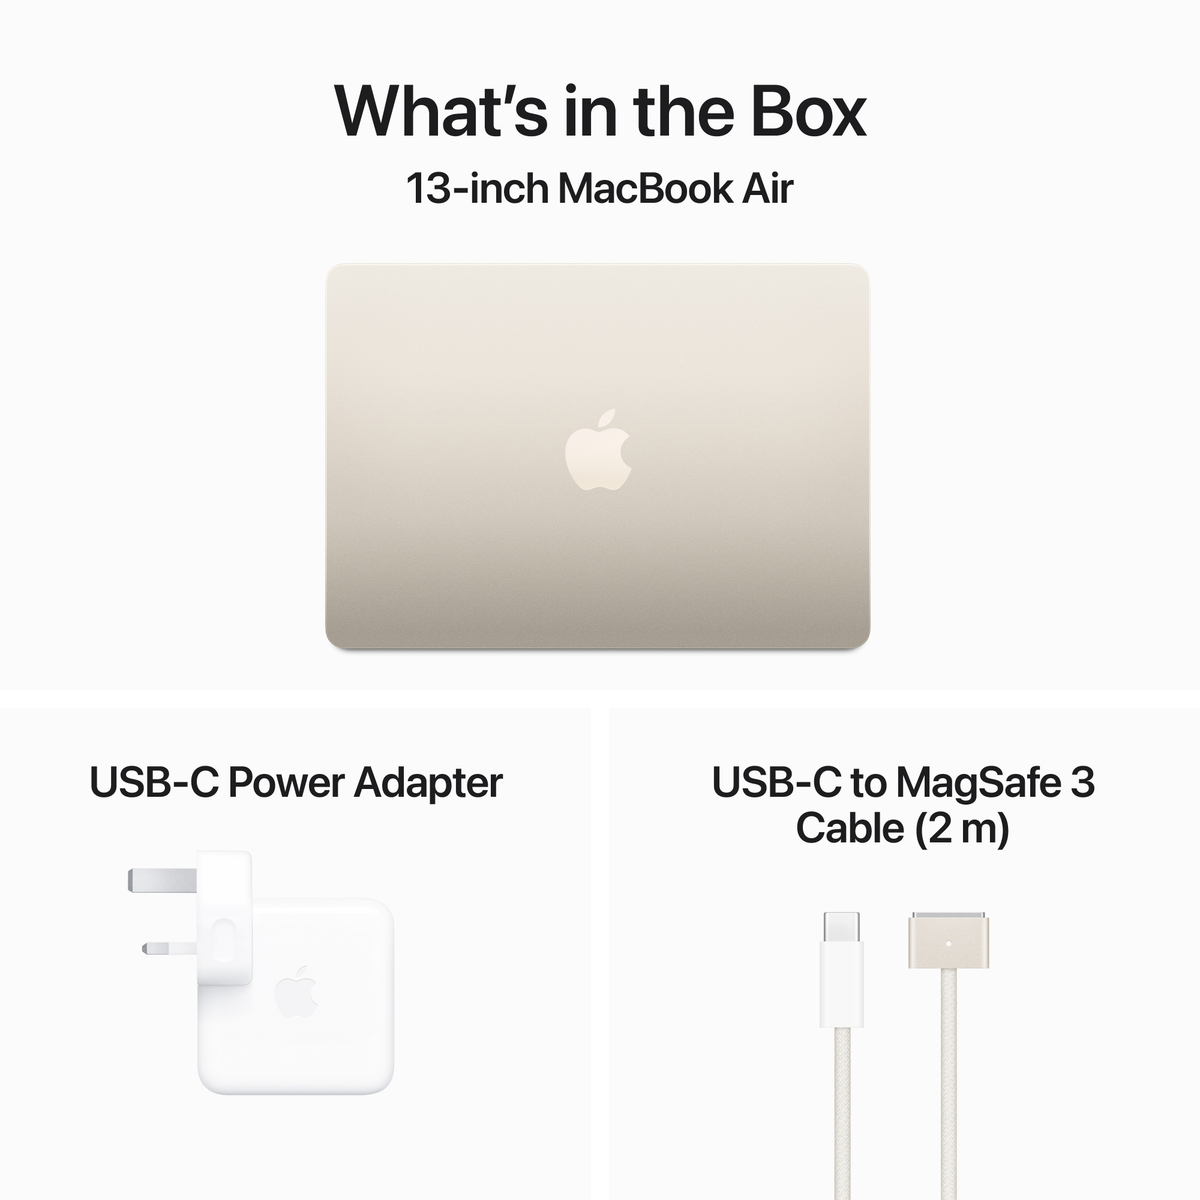 Apple MacBook Air, 13 inches, 8 GB RAM, 512 GB SSD, Apple M3 chip with 8-core CPU and 10-core GPU, macOS, Arabic, Starlight